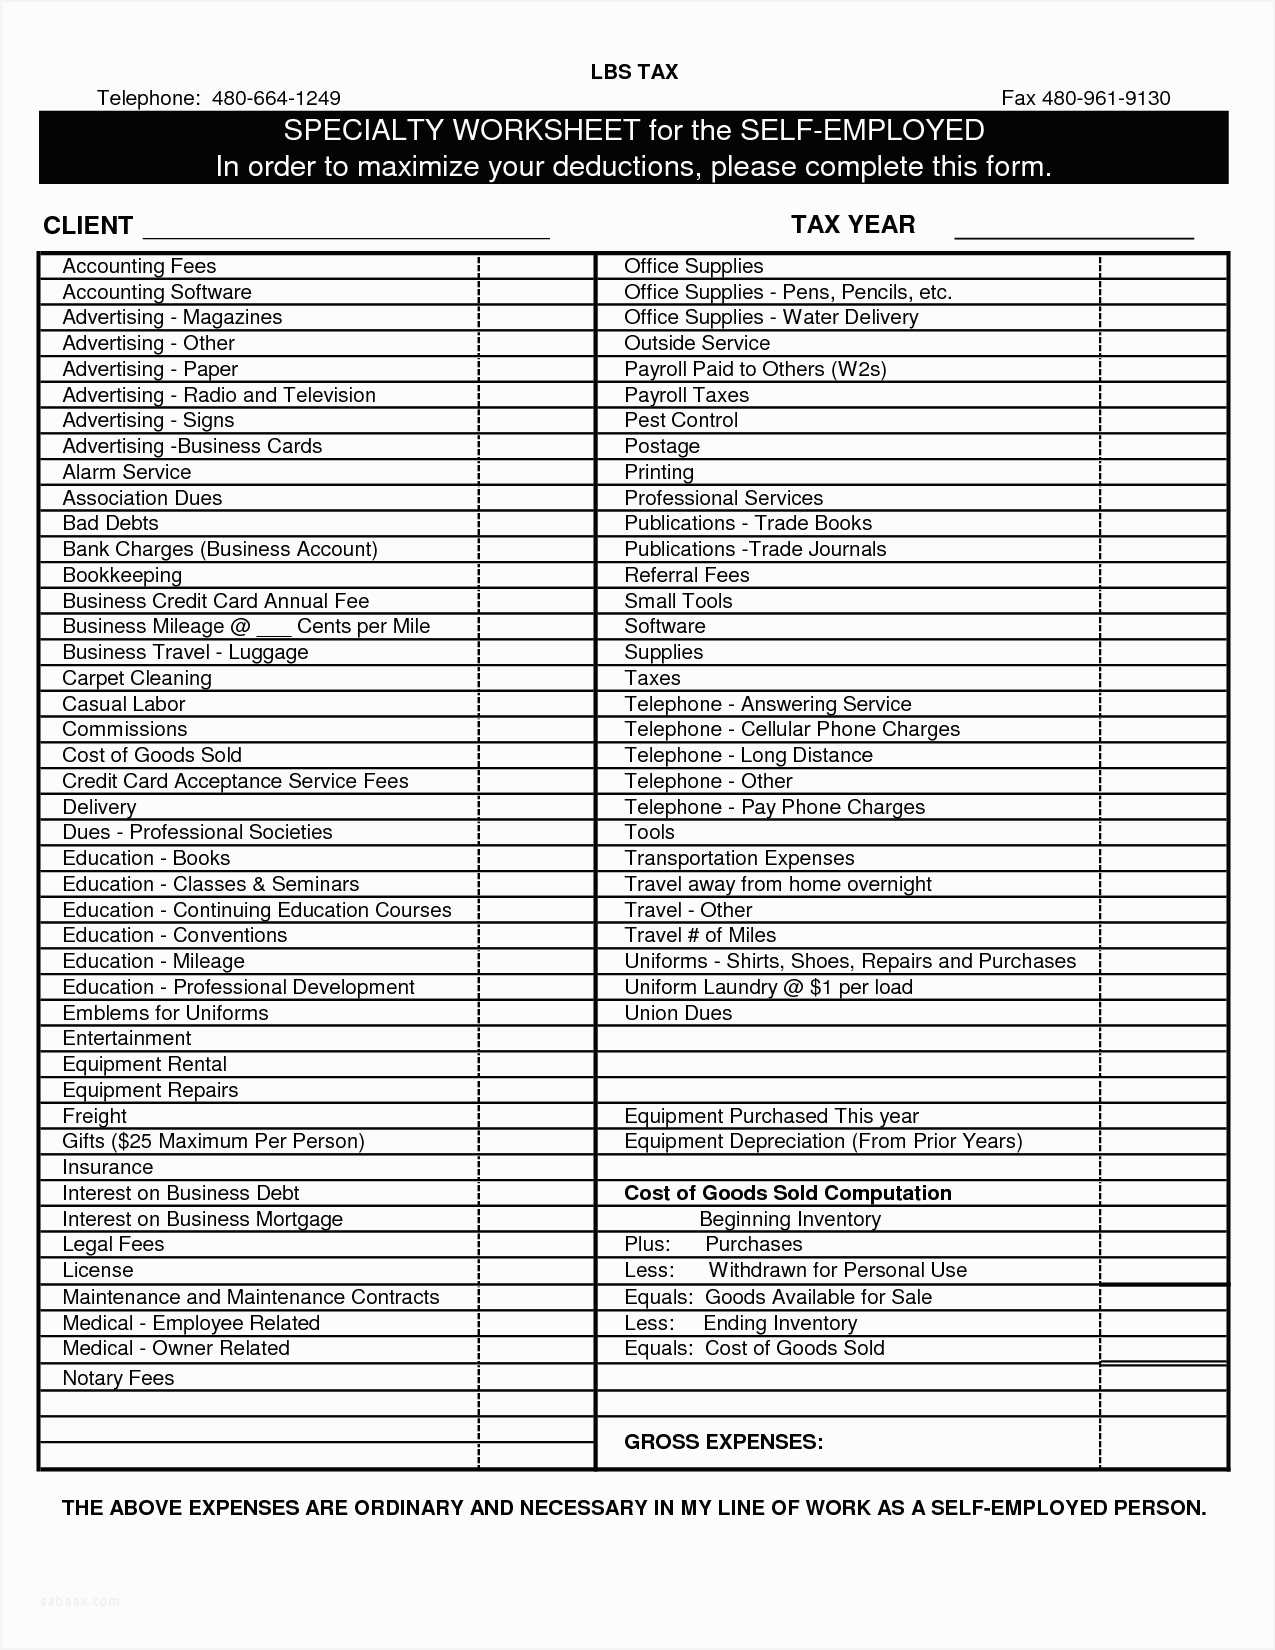 Self Employed Tax Deductions Worksheet together with Fresh 2016 Self Employment Tax and Deduction Worksheet – Sabaax